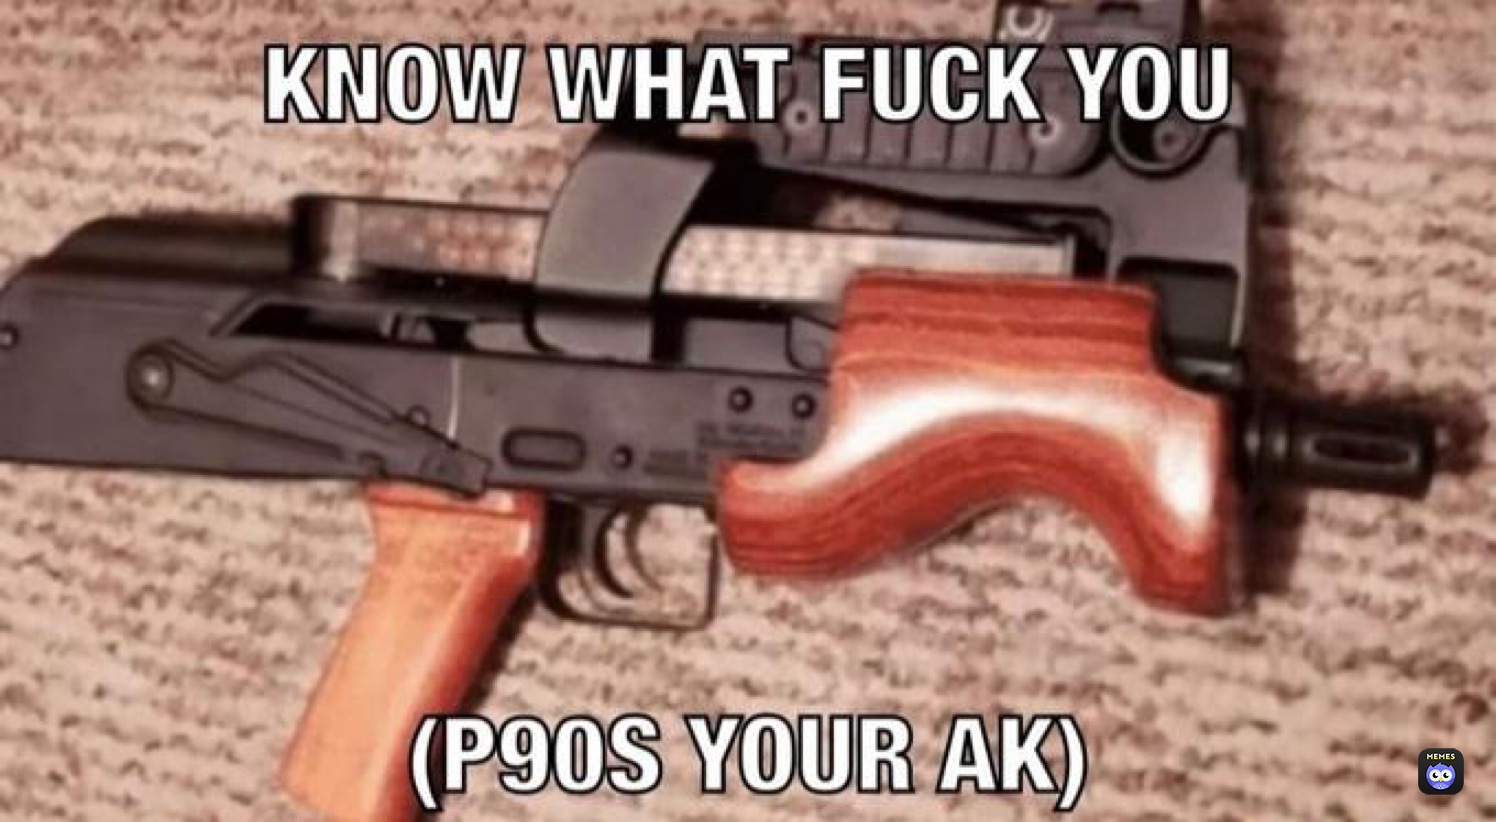 You know what fuck you gun memes